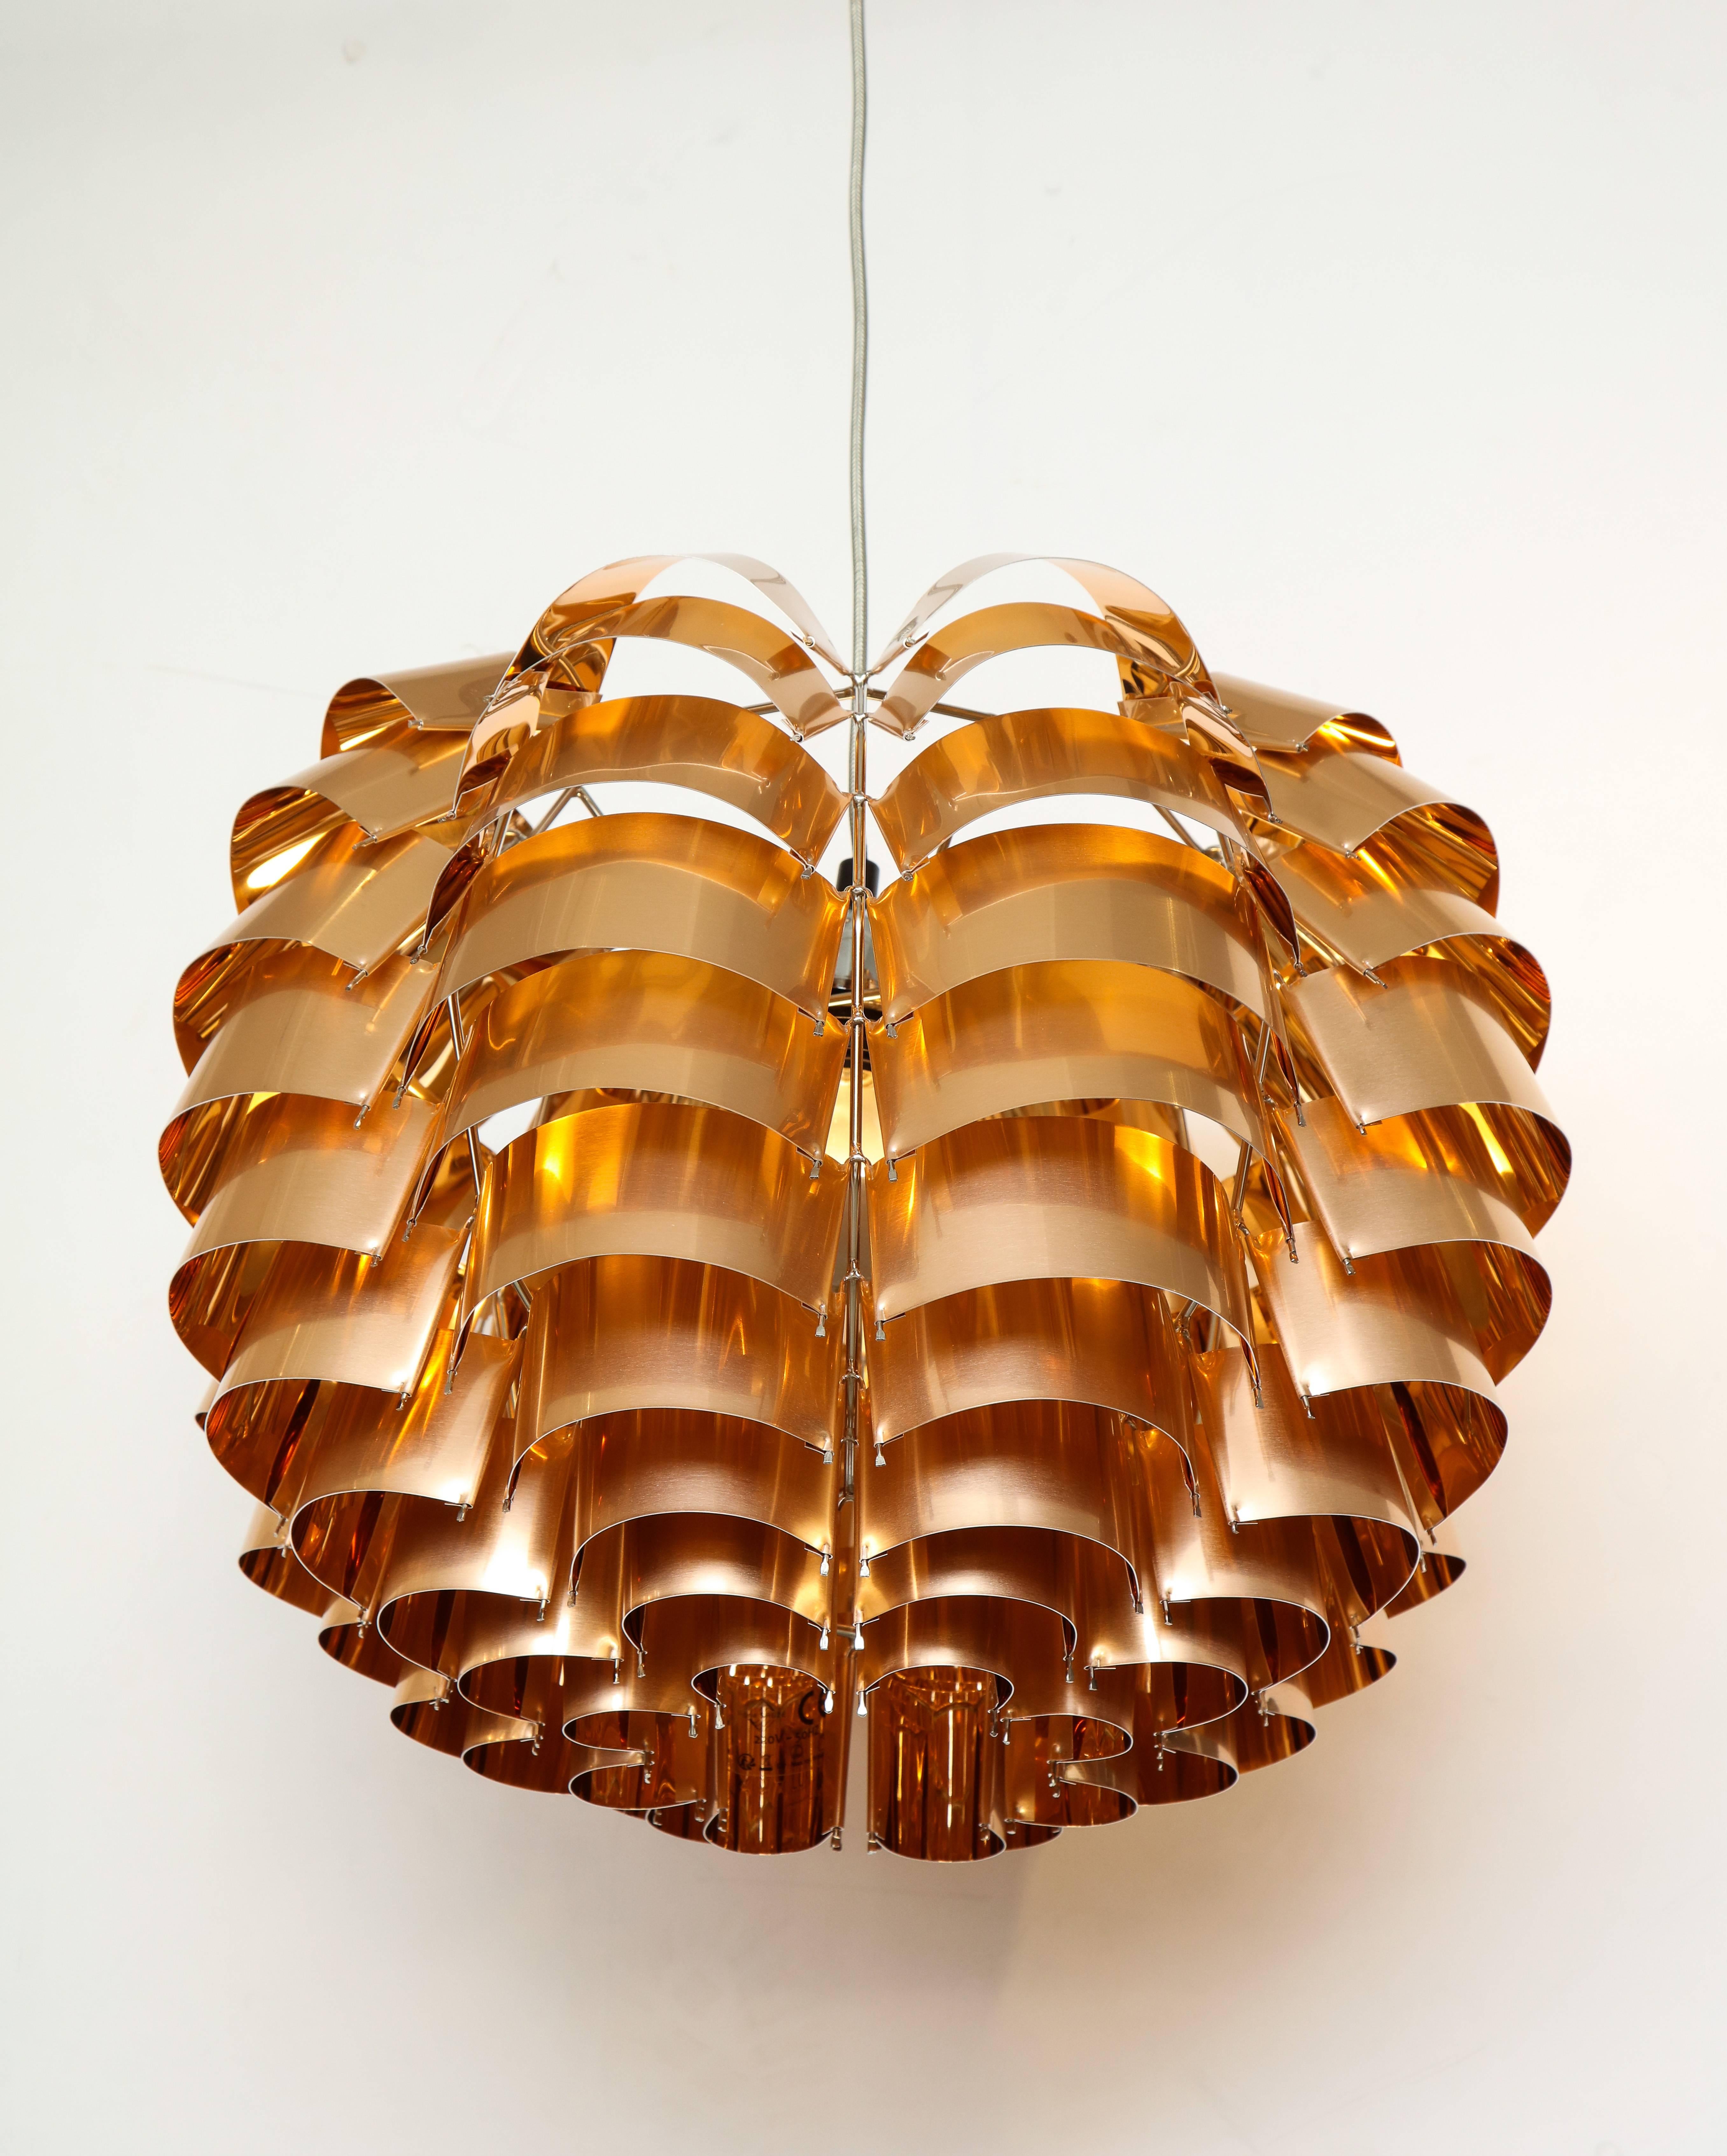 Plated Orion Forty-Eight-Light Sculpture Chandelier by Max Sauze, France, 2015 For Sale